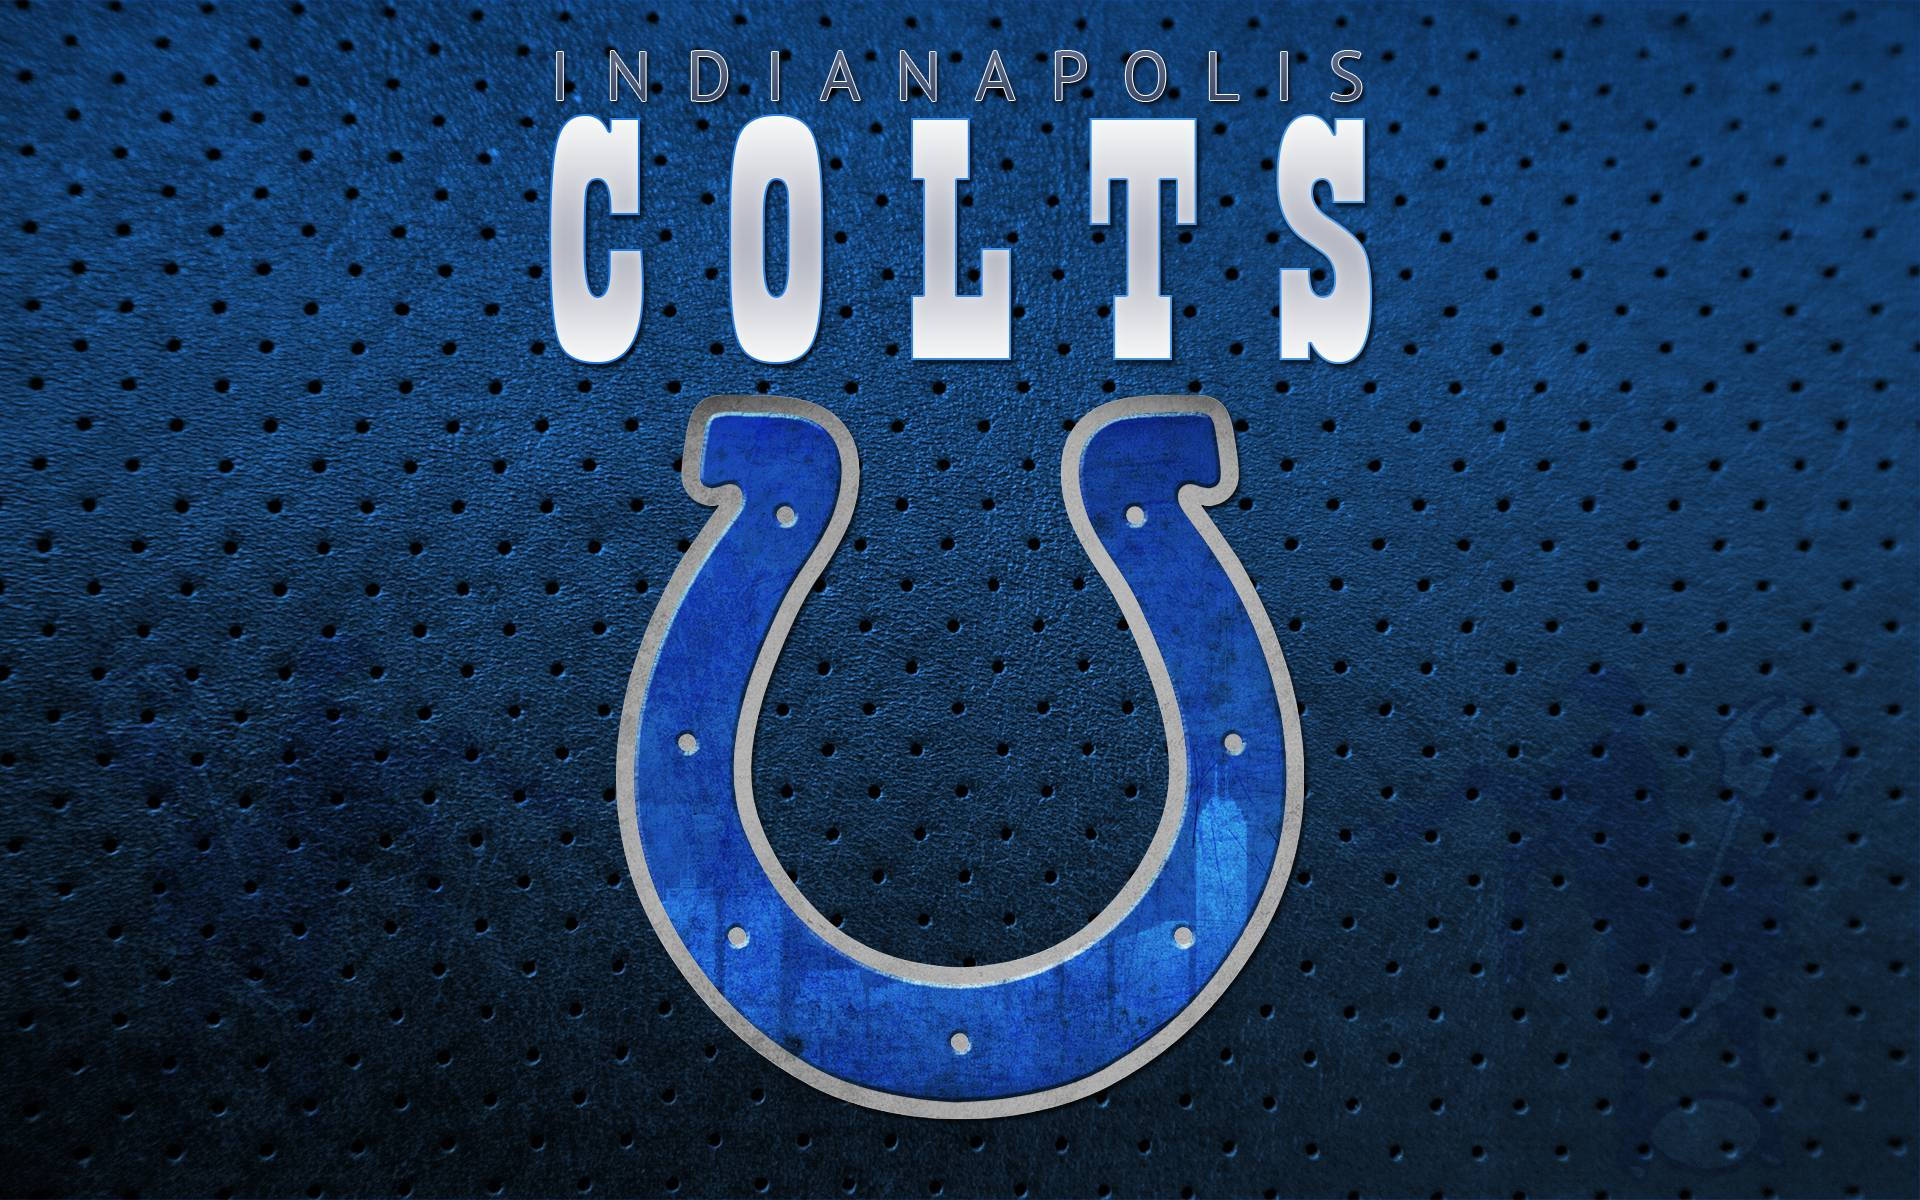 Indianapolis Colts Logo on a vibrant blue texture. Wallpaper